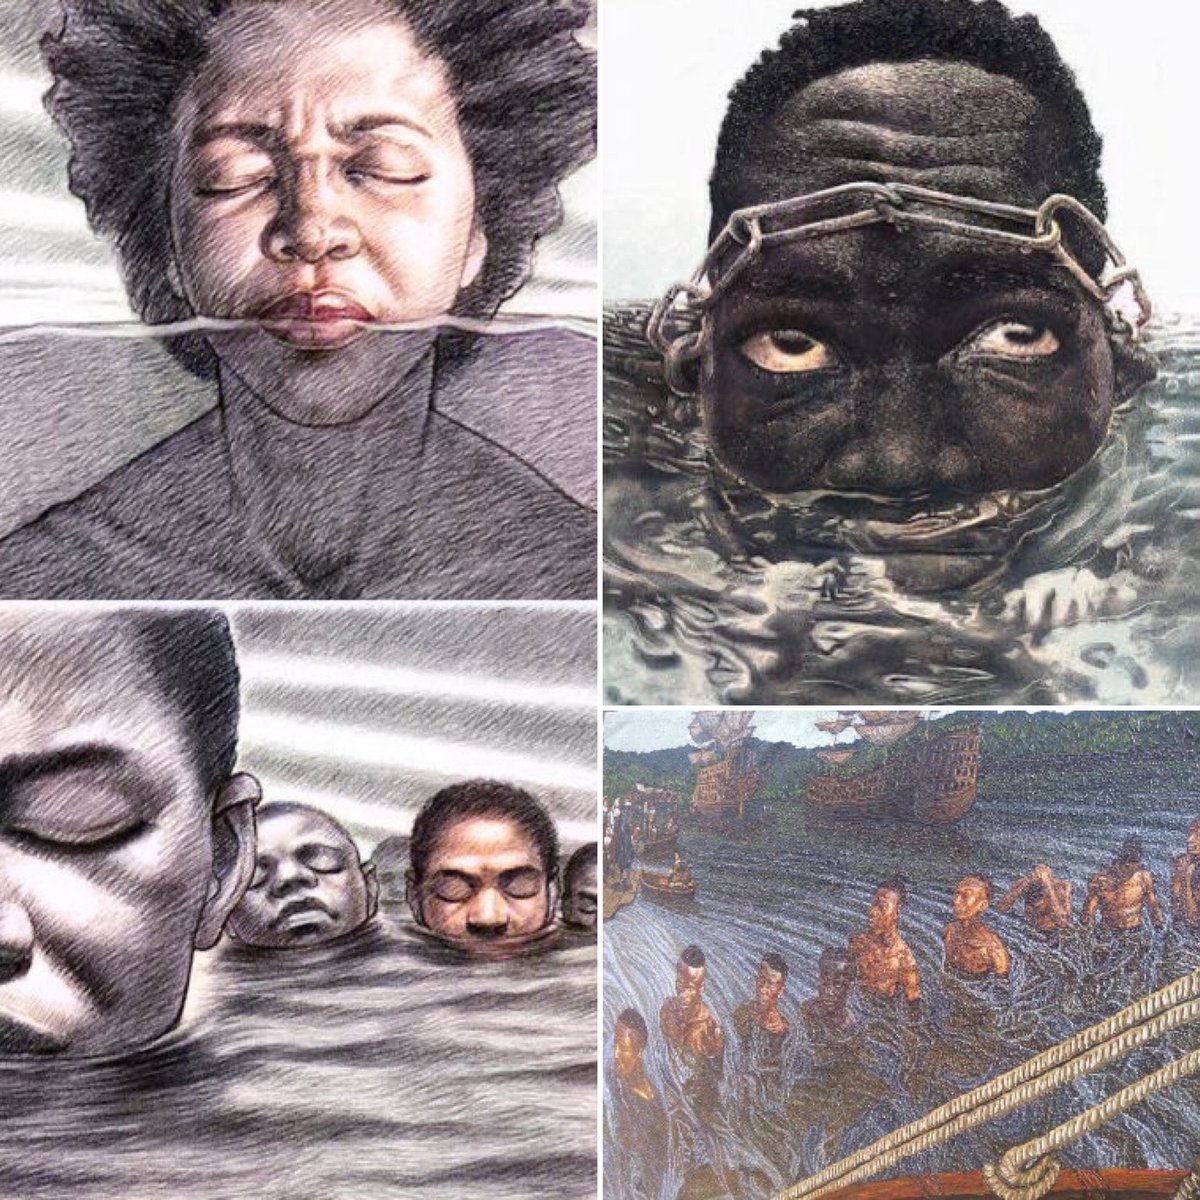 In memory of those who chose the sea.. —The 'Igbo Landing' story — In an act of mass resistance against slavery, a group of slaves revolted, took control of the slave ship grounded it on an island & rather than submit to slavery, proceeded to march into water & drown. THREAD!